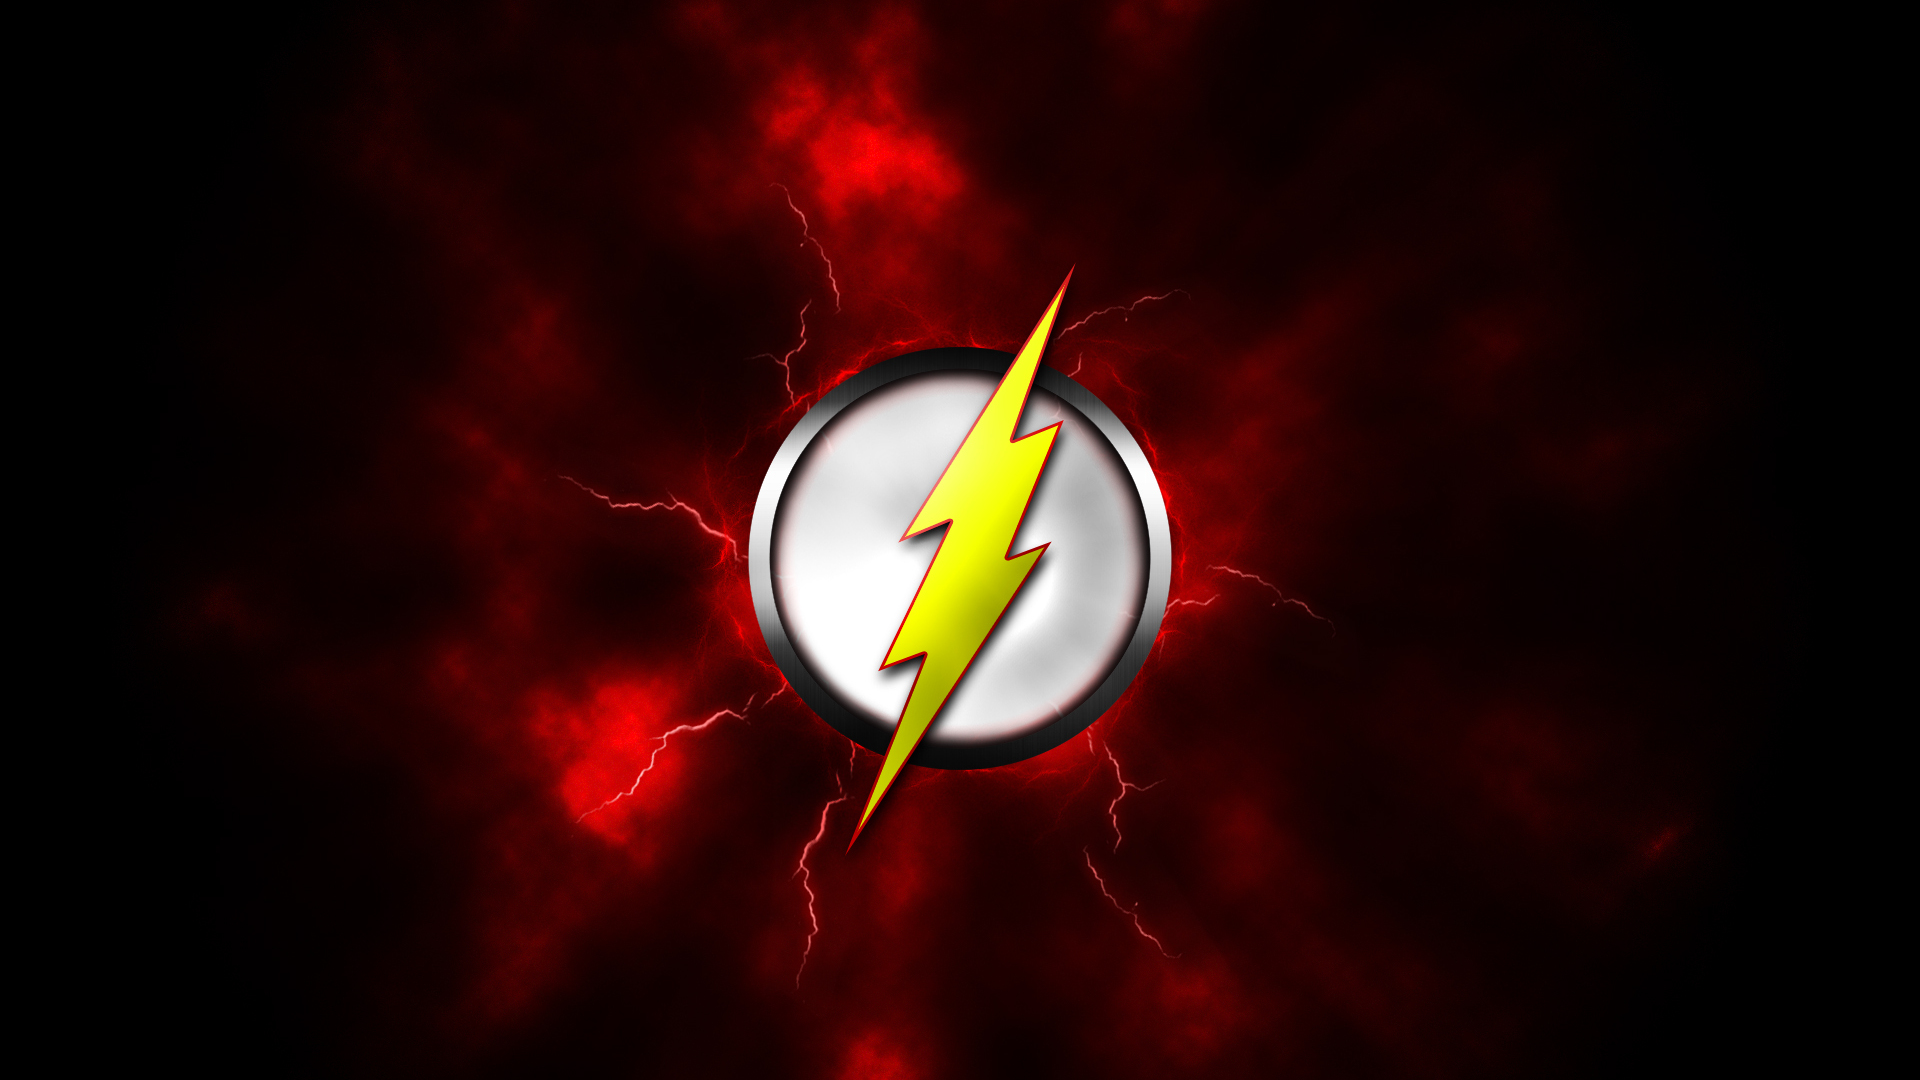 Wallpapers The Flash Symbol Logos 1920x1080 #the flash